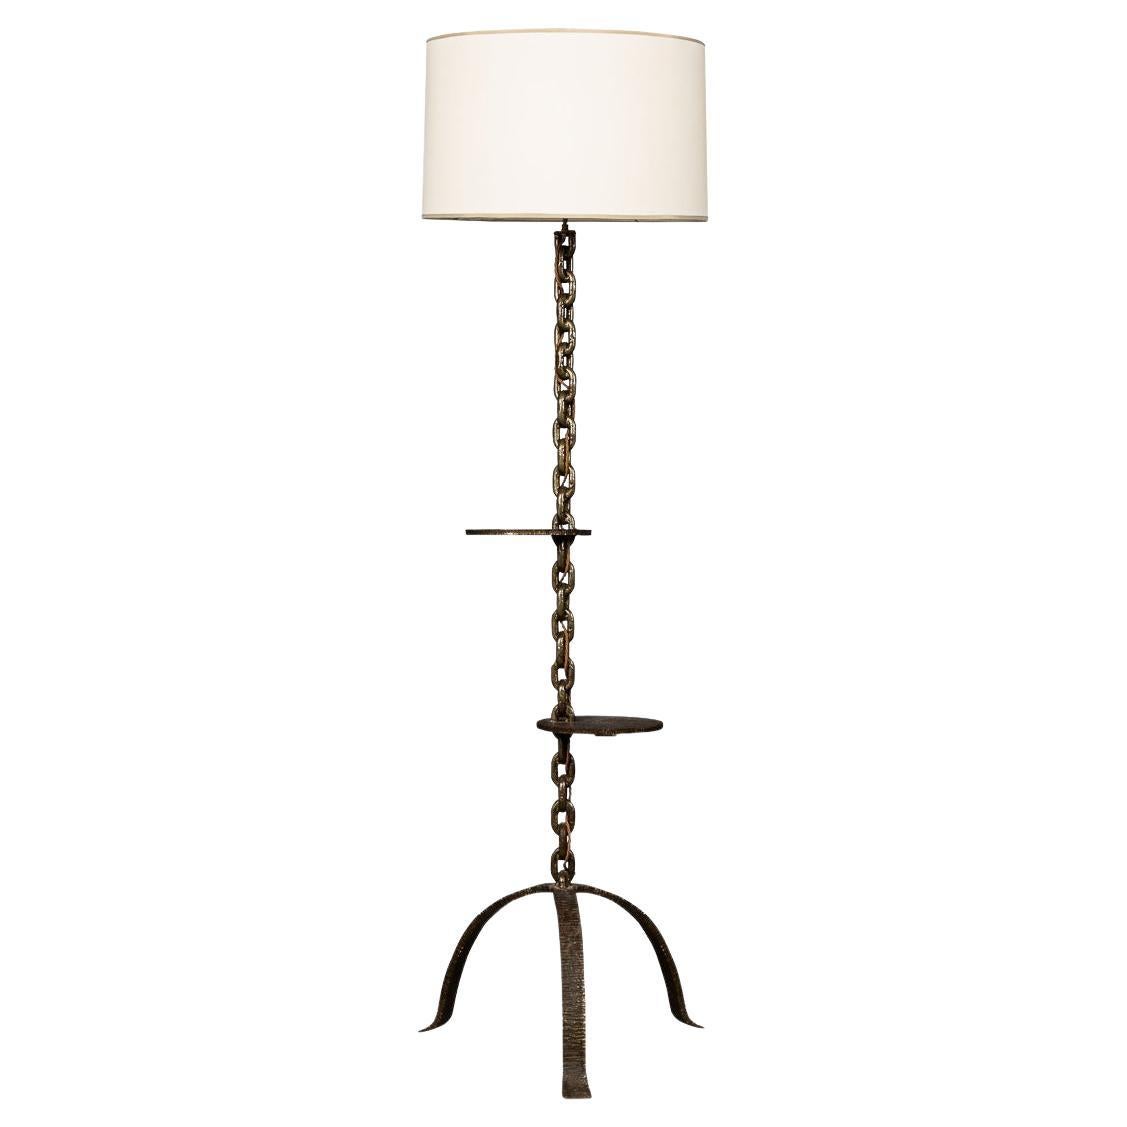 20th Century French Anchor Chain Freestanding Lamp with Shelves, circa 1930